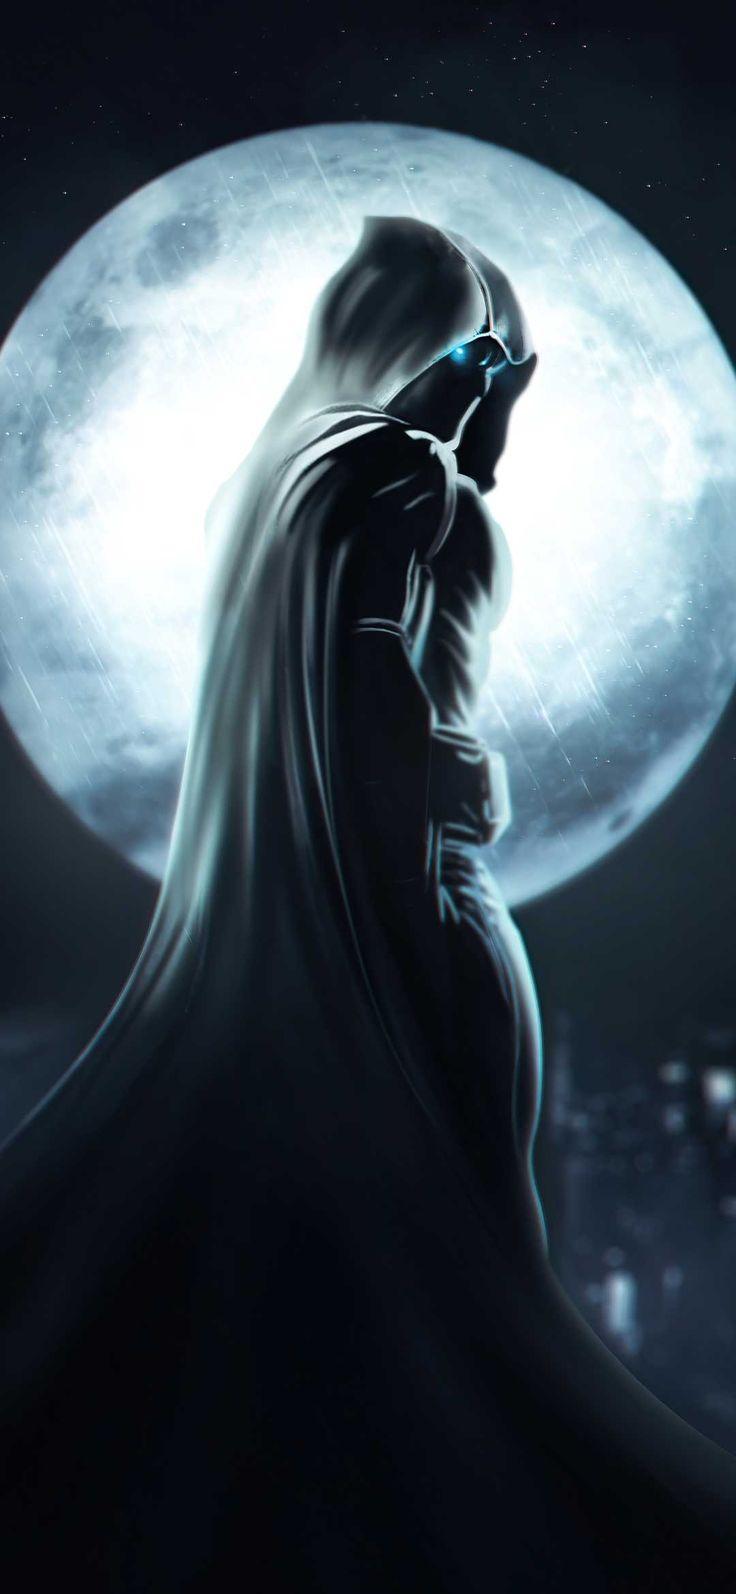 Moon Knight Wallpapers  Top 35 Best Moon Knight Backgrounds Download